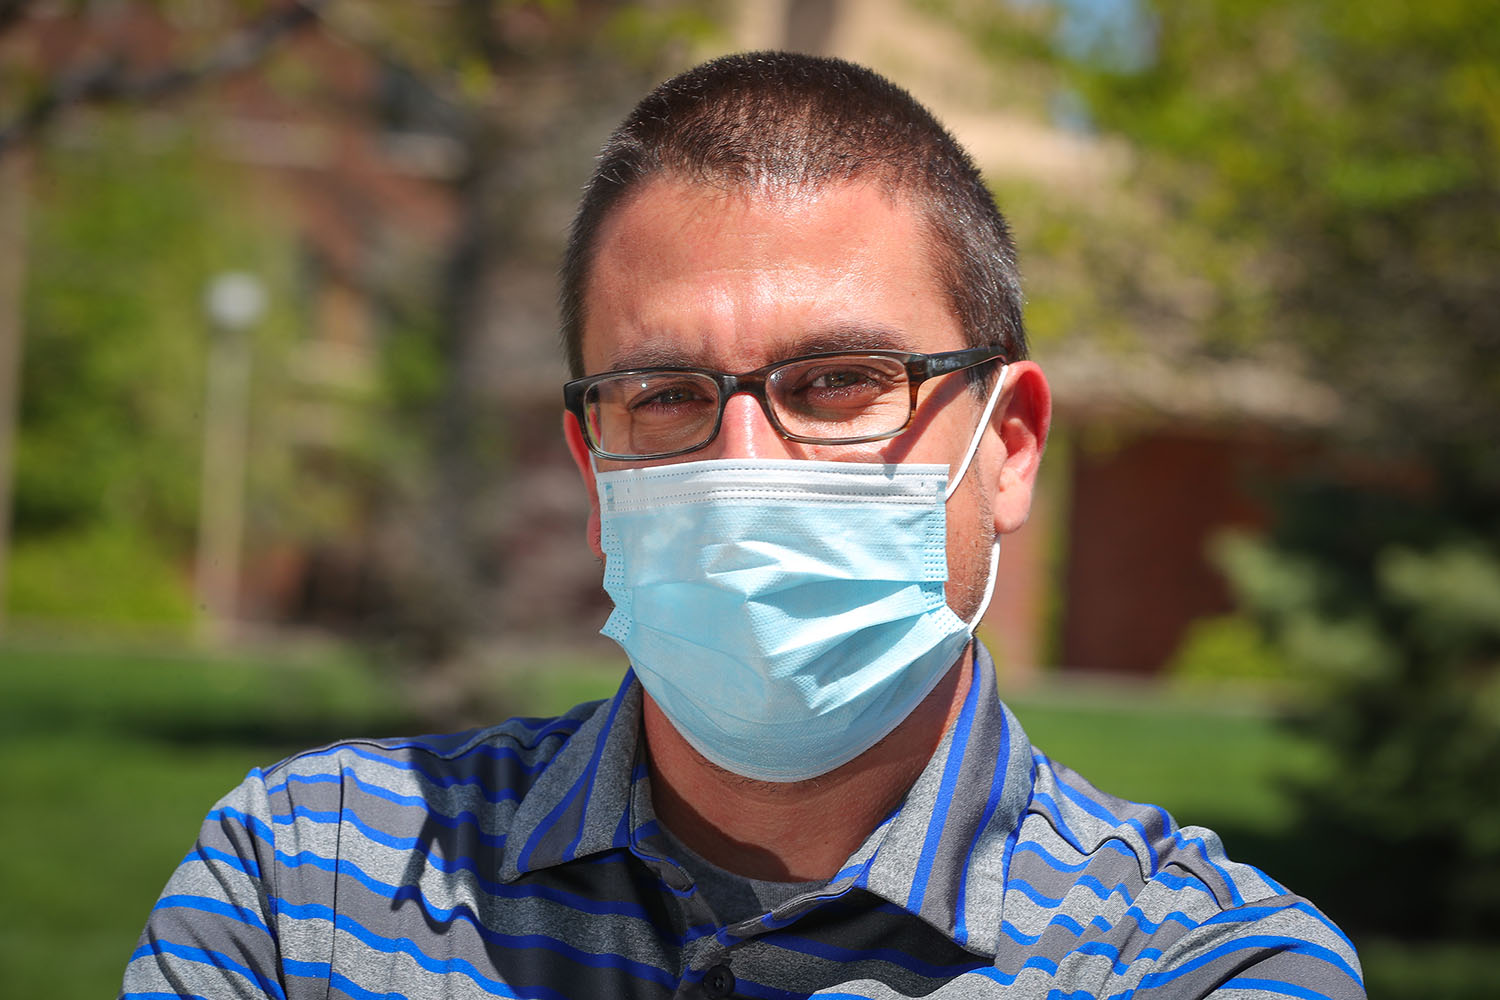 UNK associate history professor David Vail uses lessons from the past to put the current coronavirus pandemic into perspective. (Photo by Corbey R. Dorsey, UNK Communications)